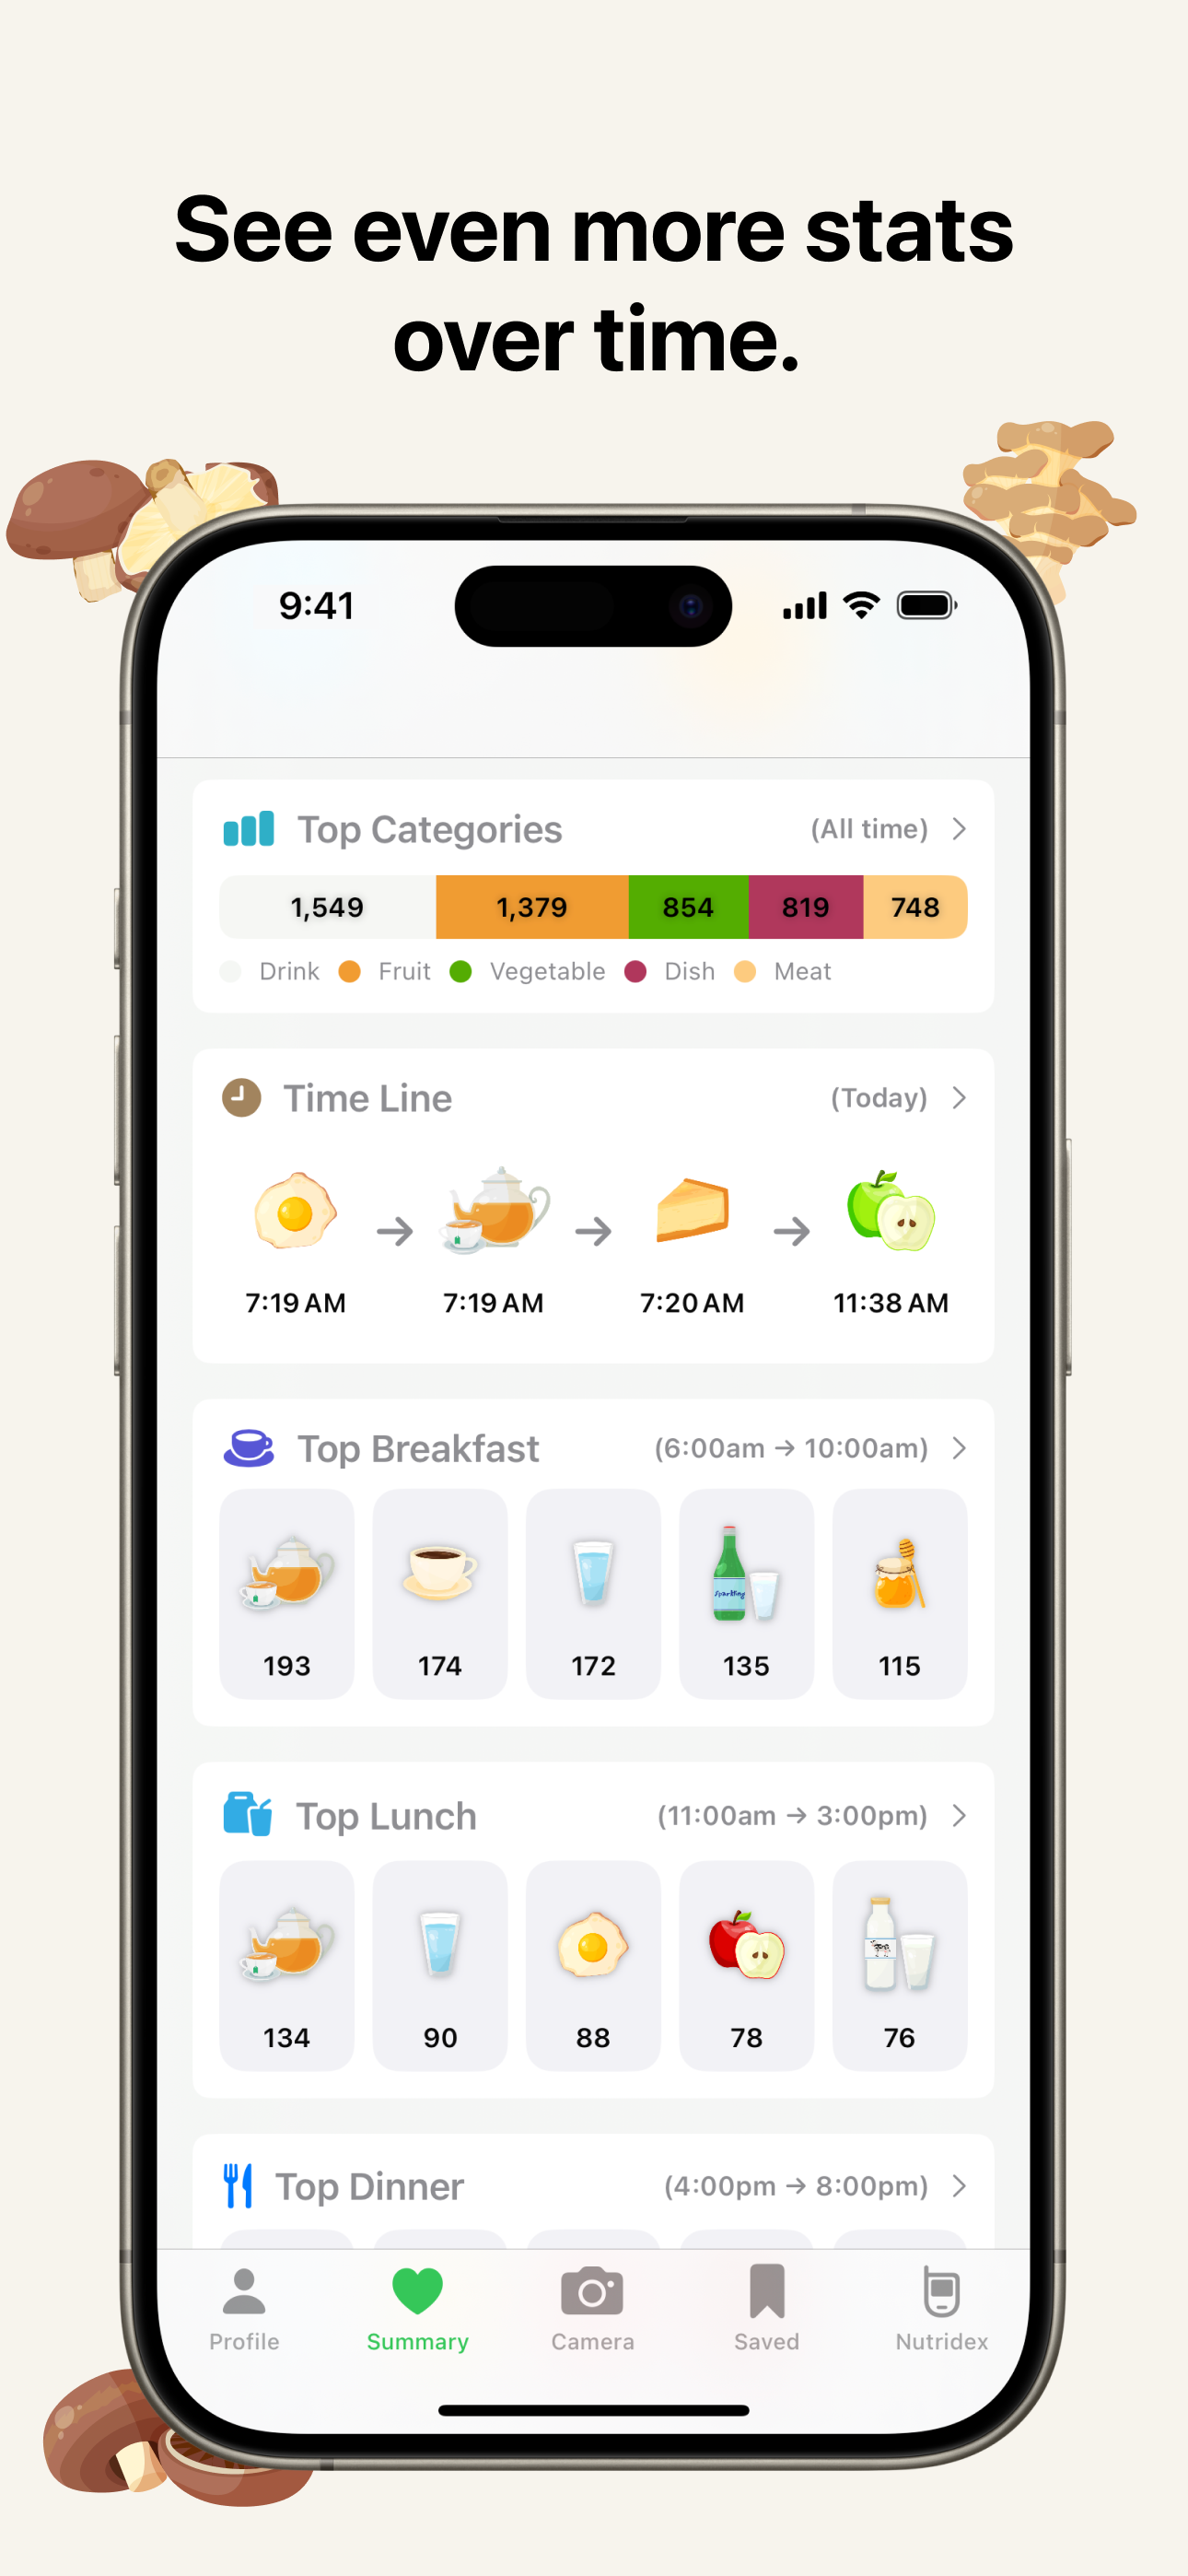 Nutrify app screenshot: A smartphone screen displaying the 'Top Categories' and 'Time Line' features with the title 'See even more stats over time.' The top categories are listed as drink (1,549), fruit (1,379), vegetable (854), dish (819), and meat (748). The timeline for today shows food items and their respective times: 7:19 AM (egg and tea), 7:20 AM (cheese), and 11:38 AM (apple). The 'Top Breakfast,' 'Top Lunch,' and 'Top Dinner' sections list various food items with their respective counts. The background is beige with various food icons.